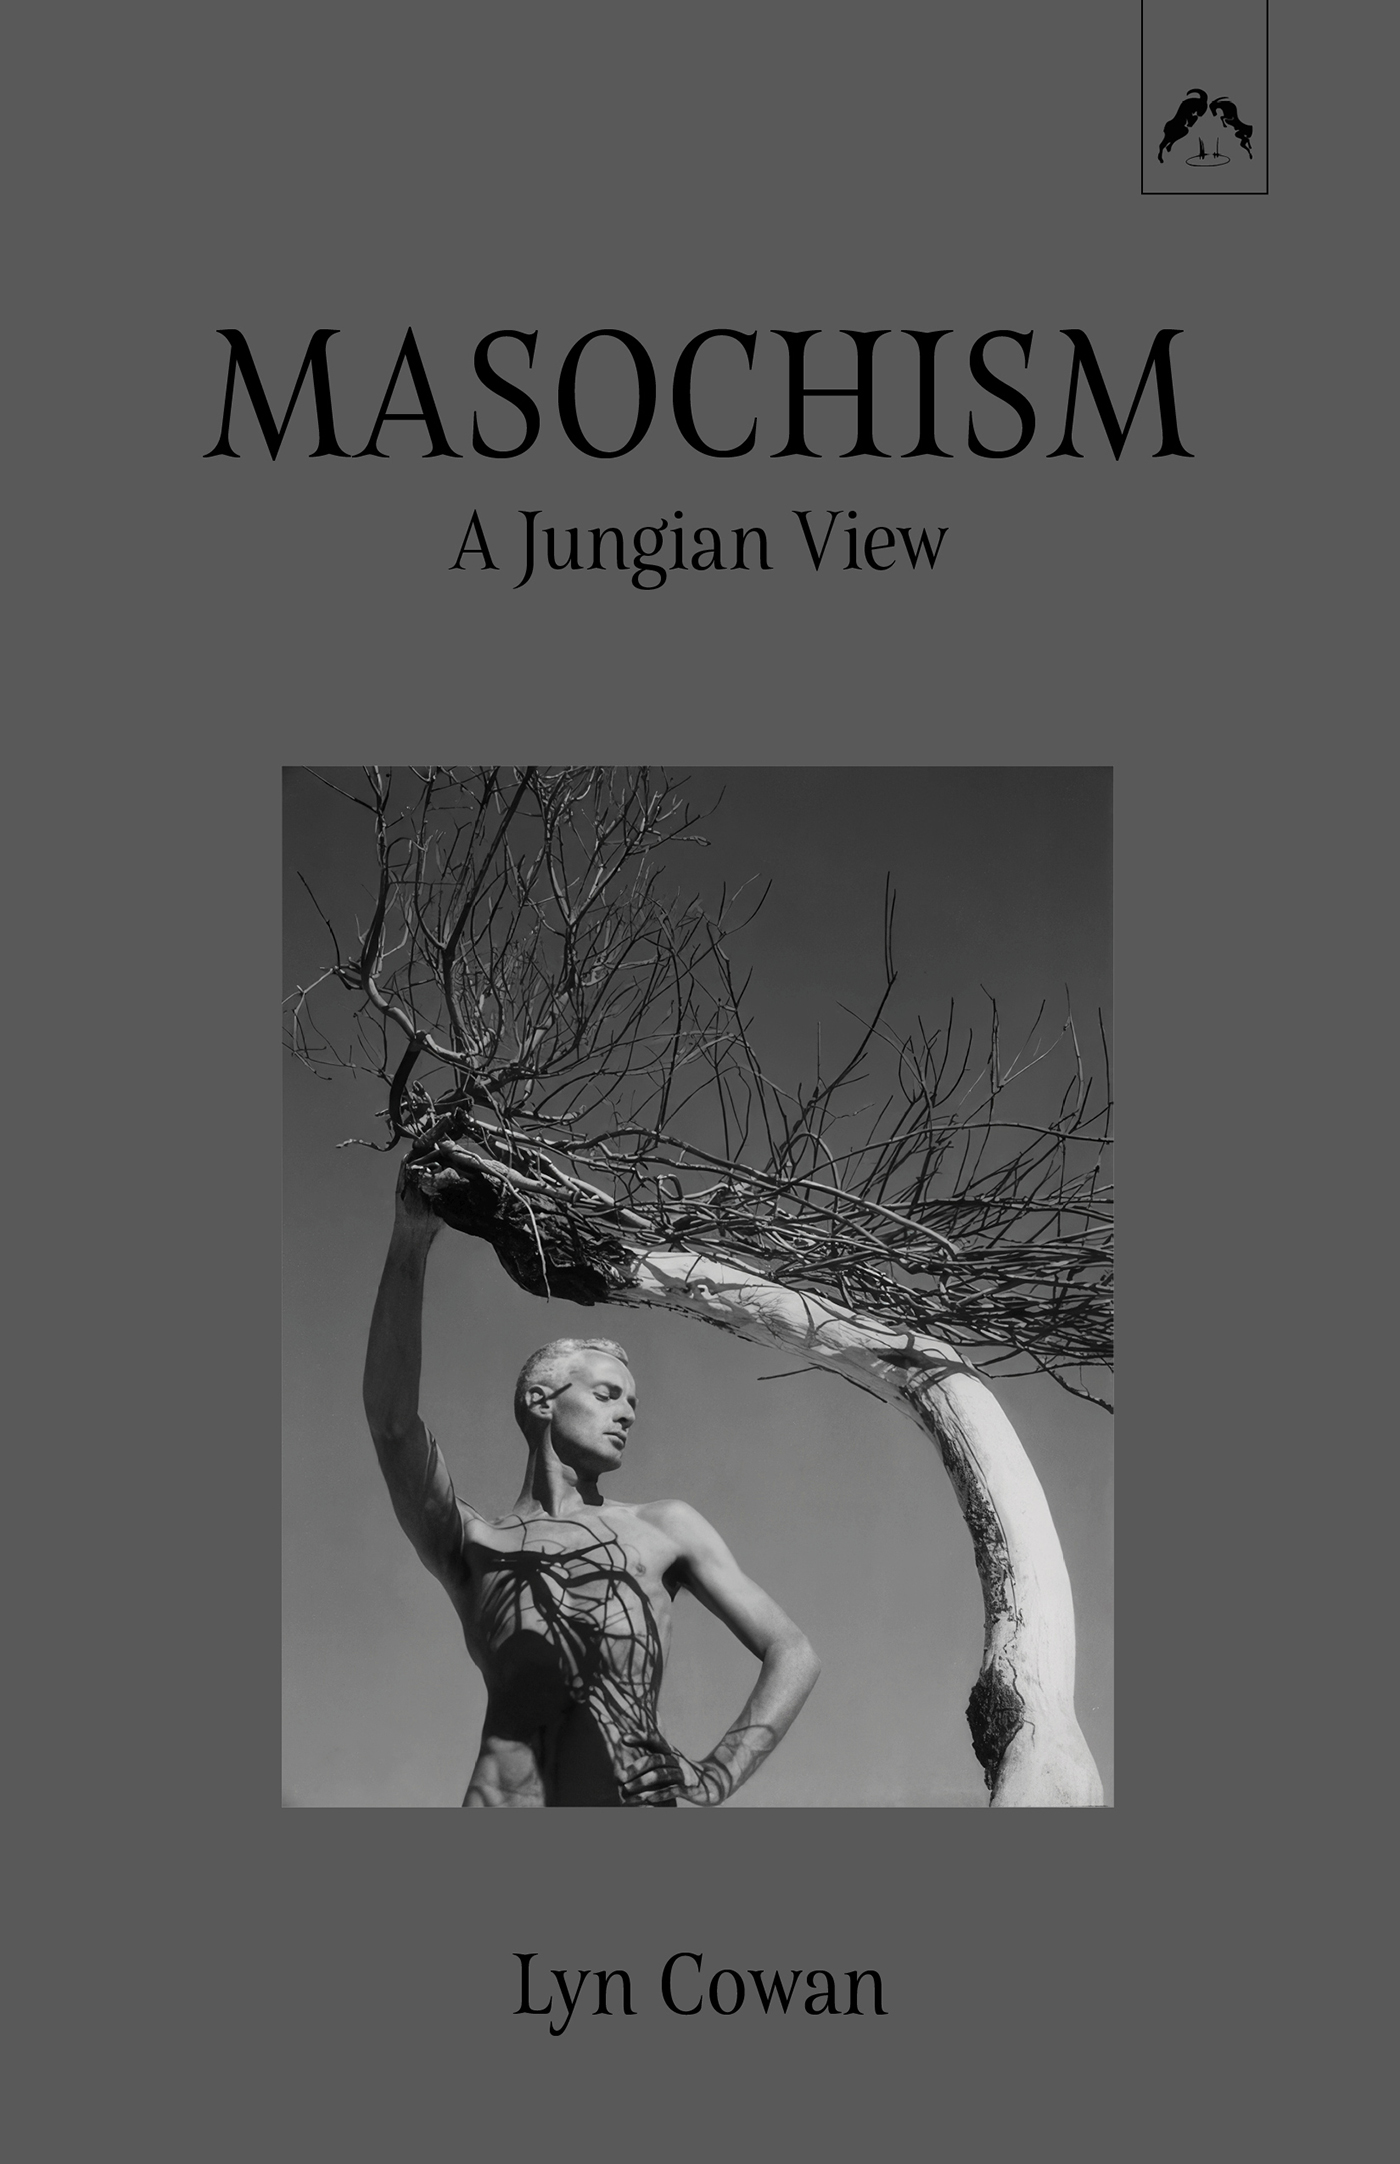 Cover image with photo of George Platt Lynes standing under a spiky tree